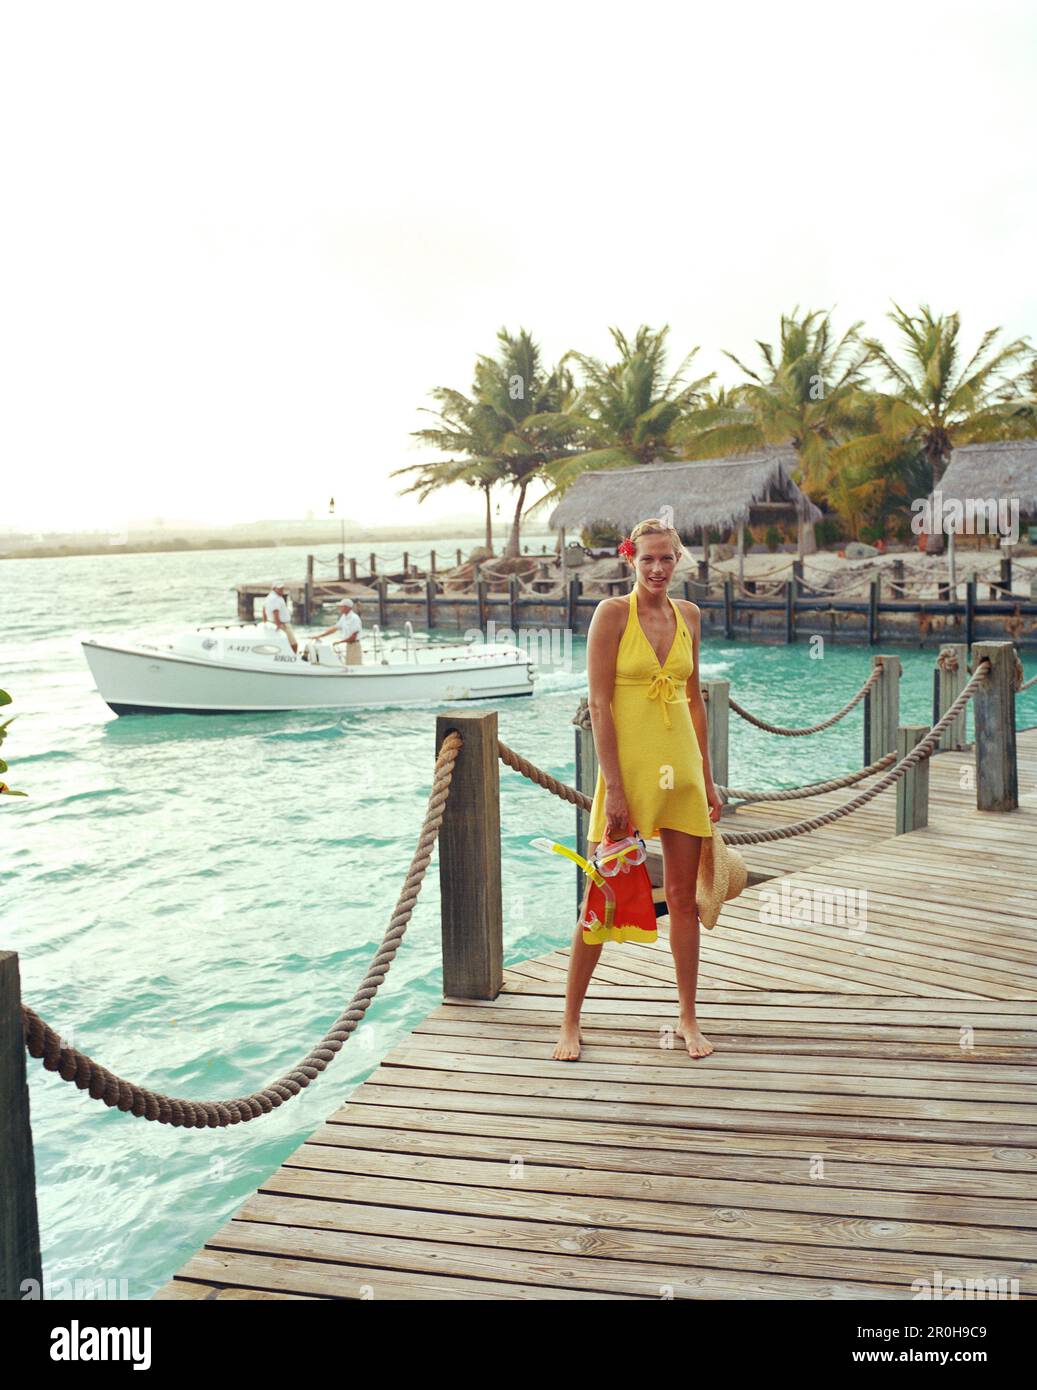 ARUBA, portrait of young woman standing on a dock with her snorkel gear, Renaissance Island Stock Photo